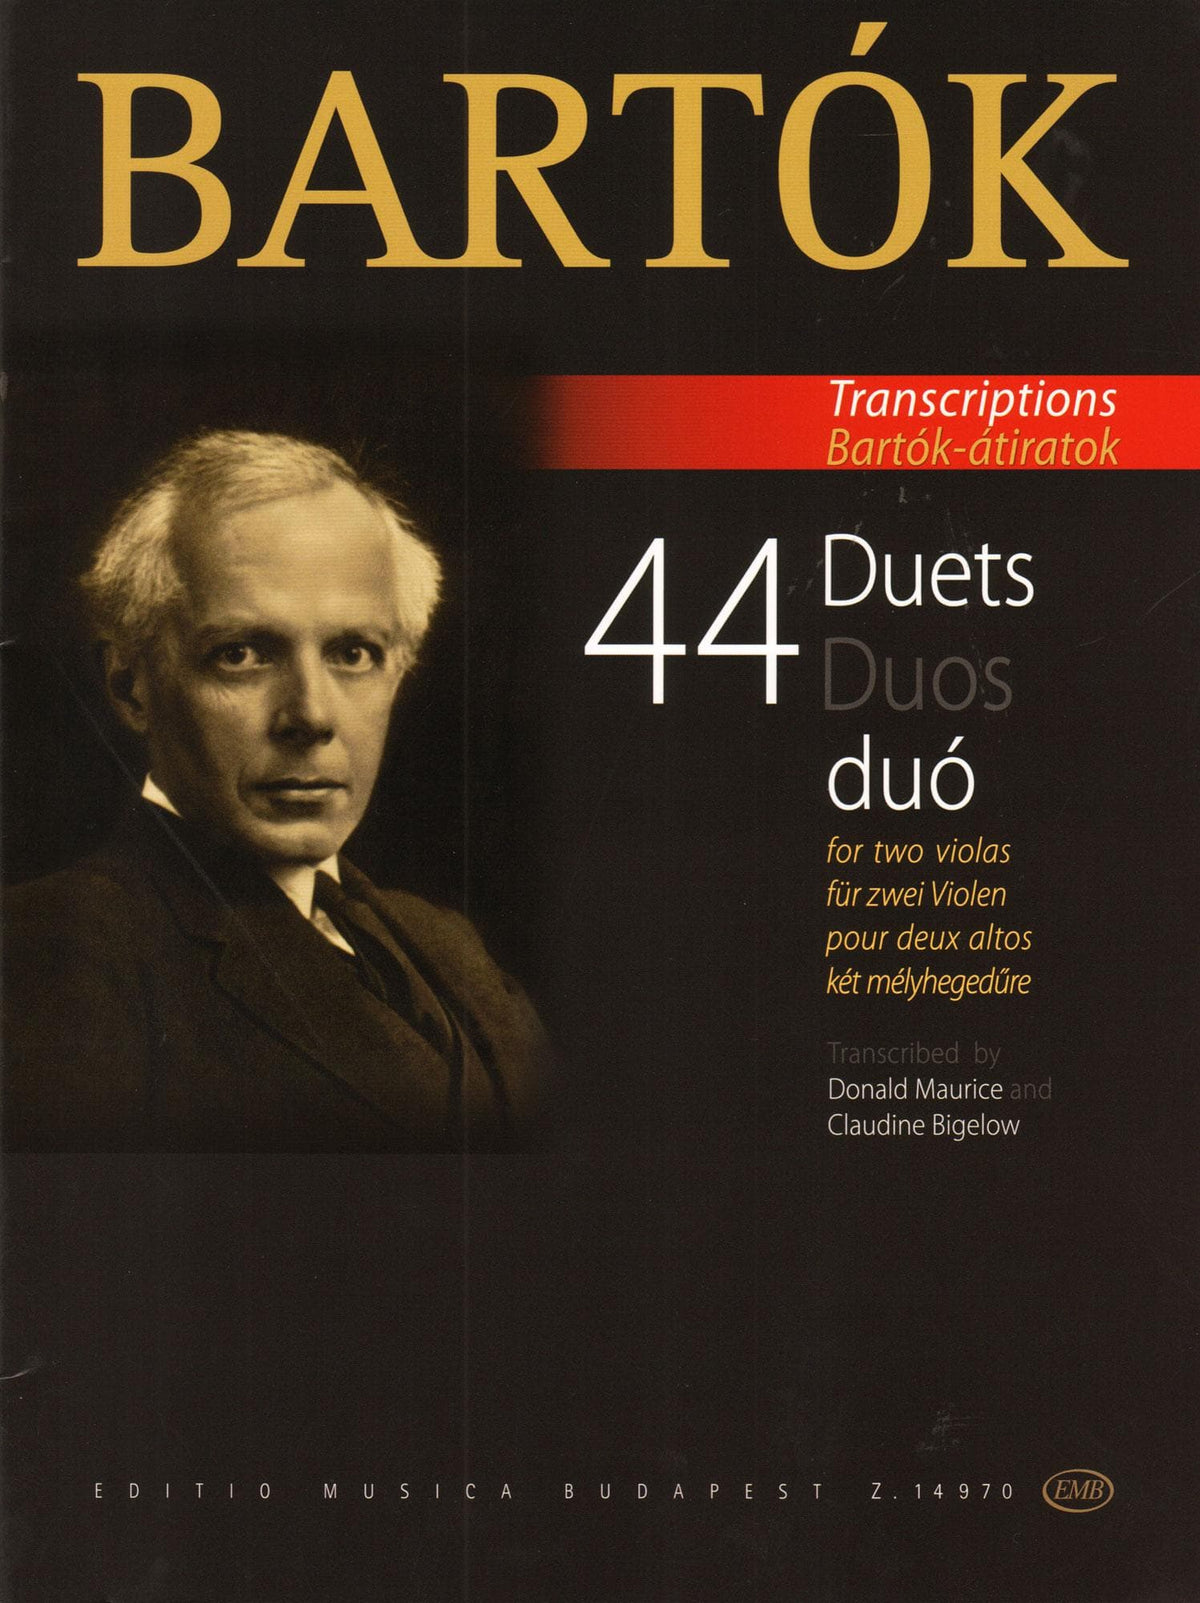 Bartók, Béla - 44 Duets - Transcribed by Donald Maurice and Claudine Bigelow - for Two Violas - Editio Musica Budapest